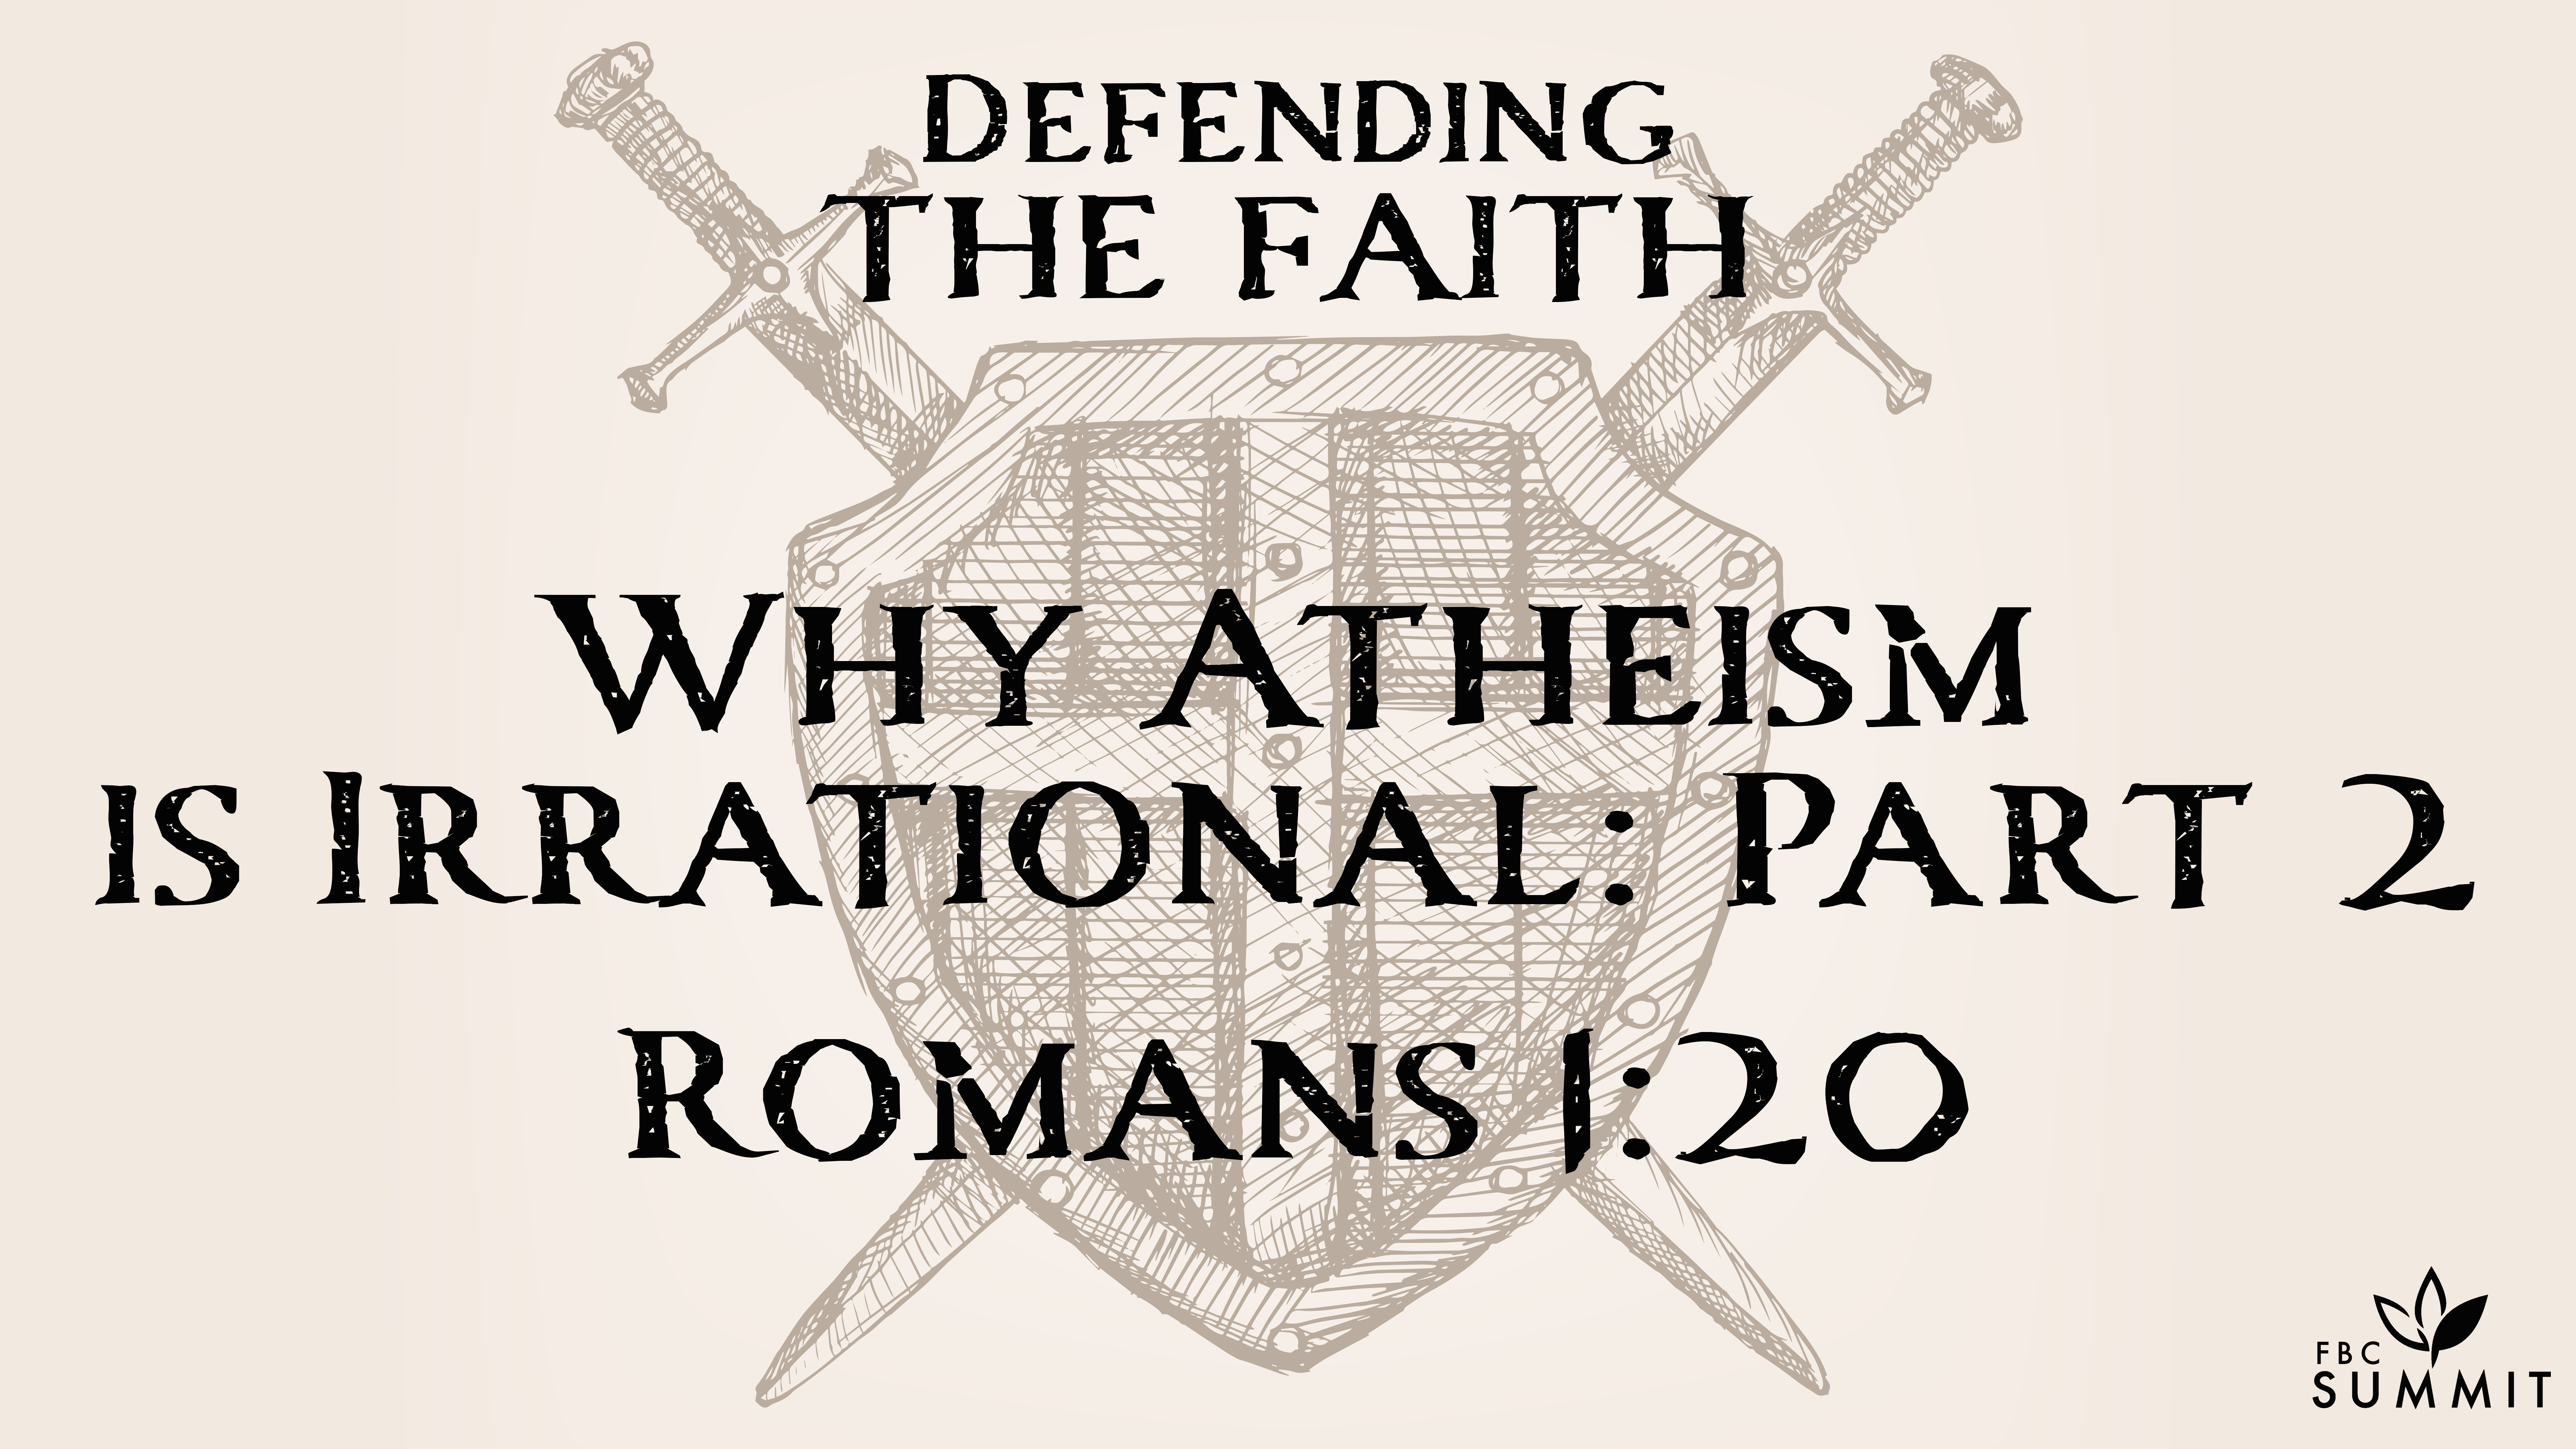 "Why Atheism is Irrational" Part II